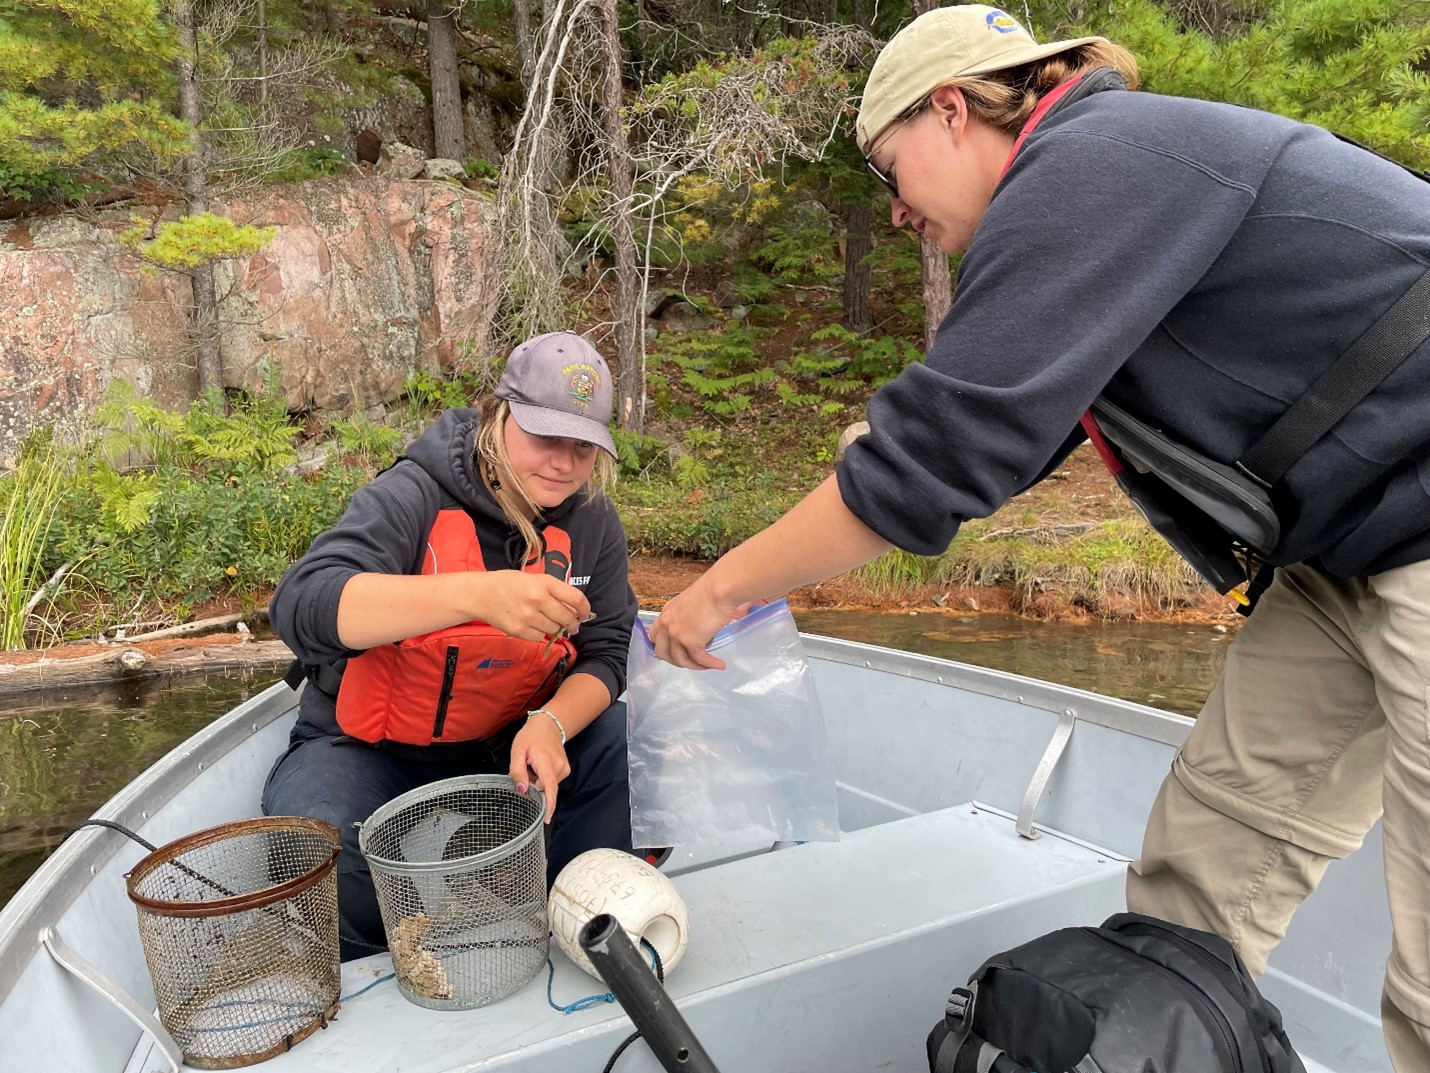 Two researchers in a boat. One is kneeling, the other is standing and leaning towards their colleague with an open plastic bag. The kneeling researcher is holding a specimen caught in a research trap.